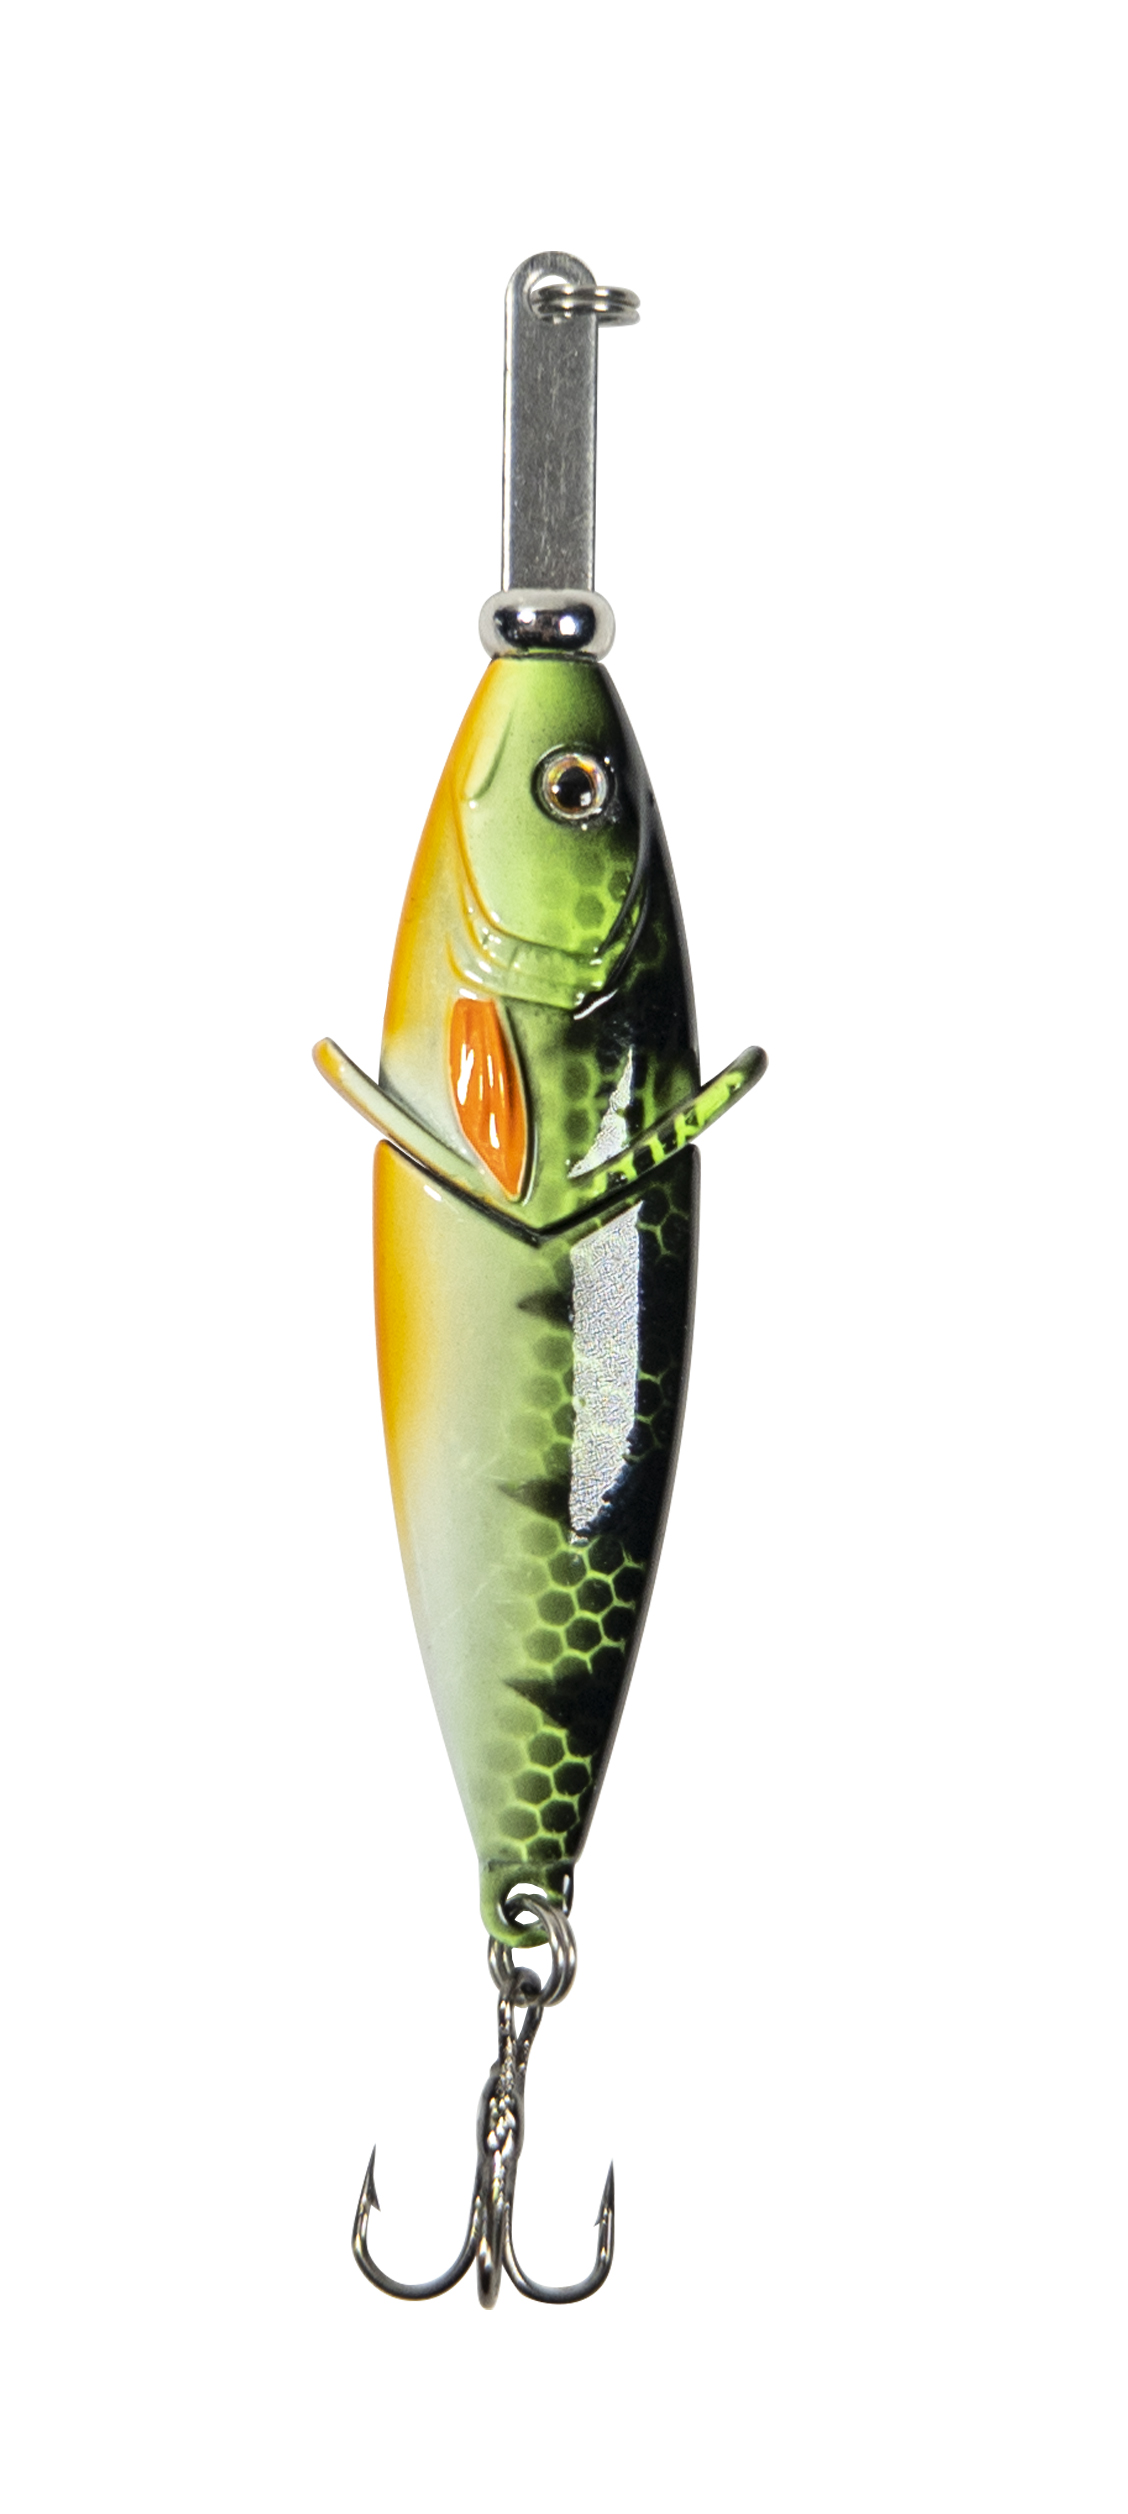 Lunkerhunt Hatch Natural Fishing Lure